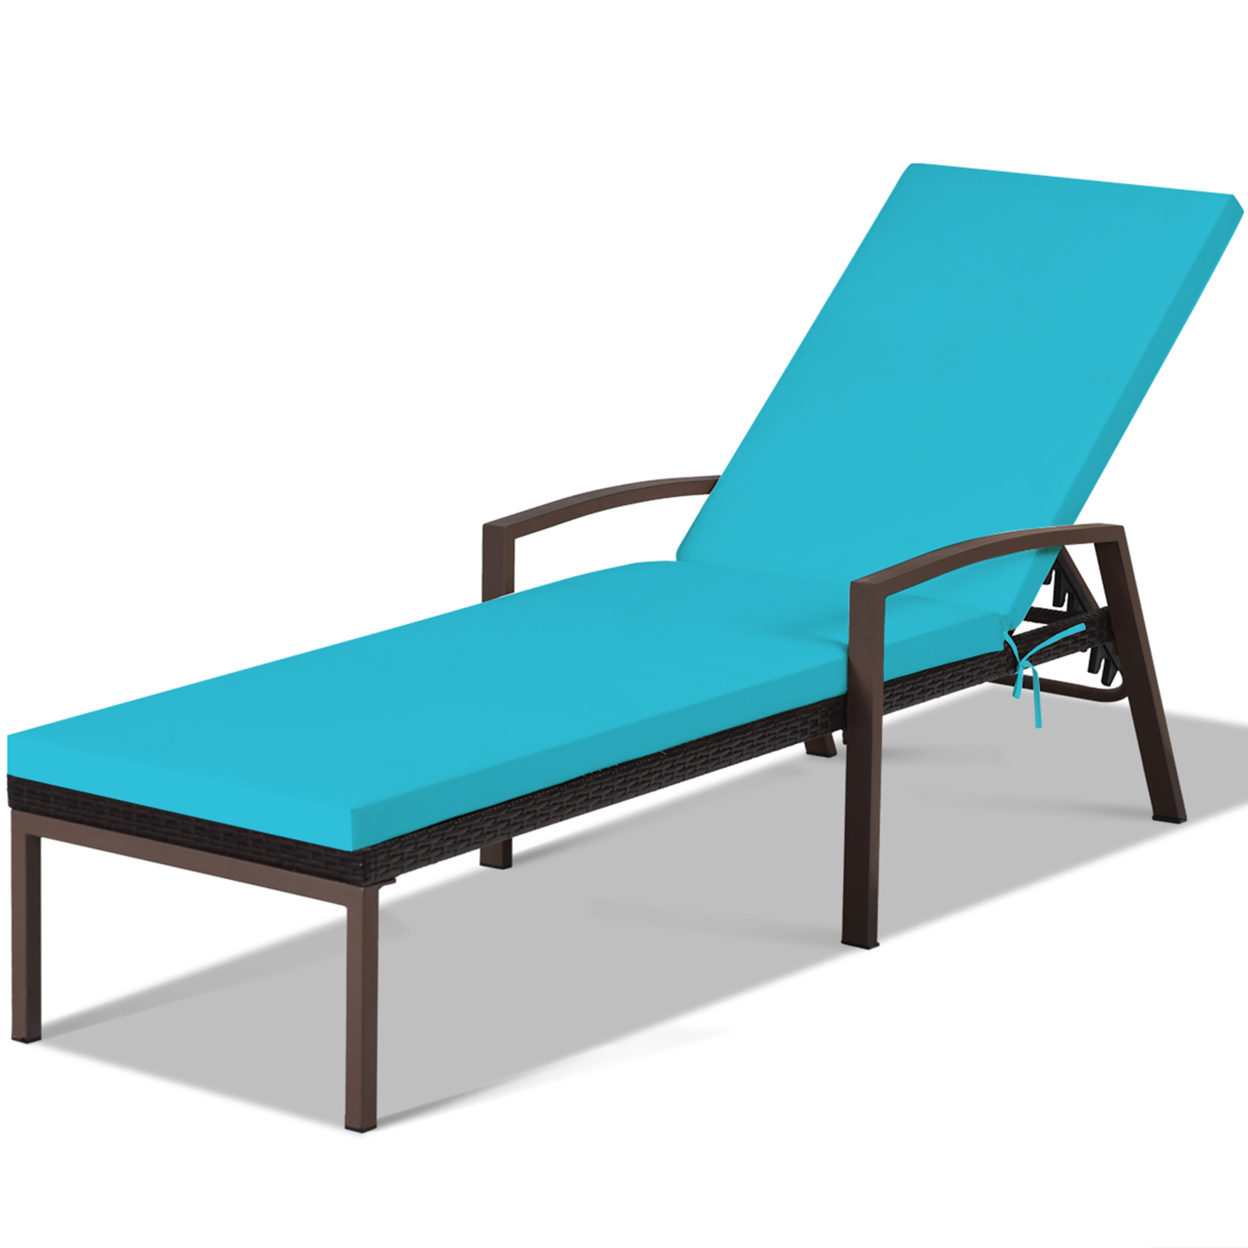 Adjustable Rattan Chaise Recliner Lounge Chair Patio Outdoor W/ Turquoise Cushion